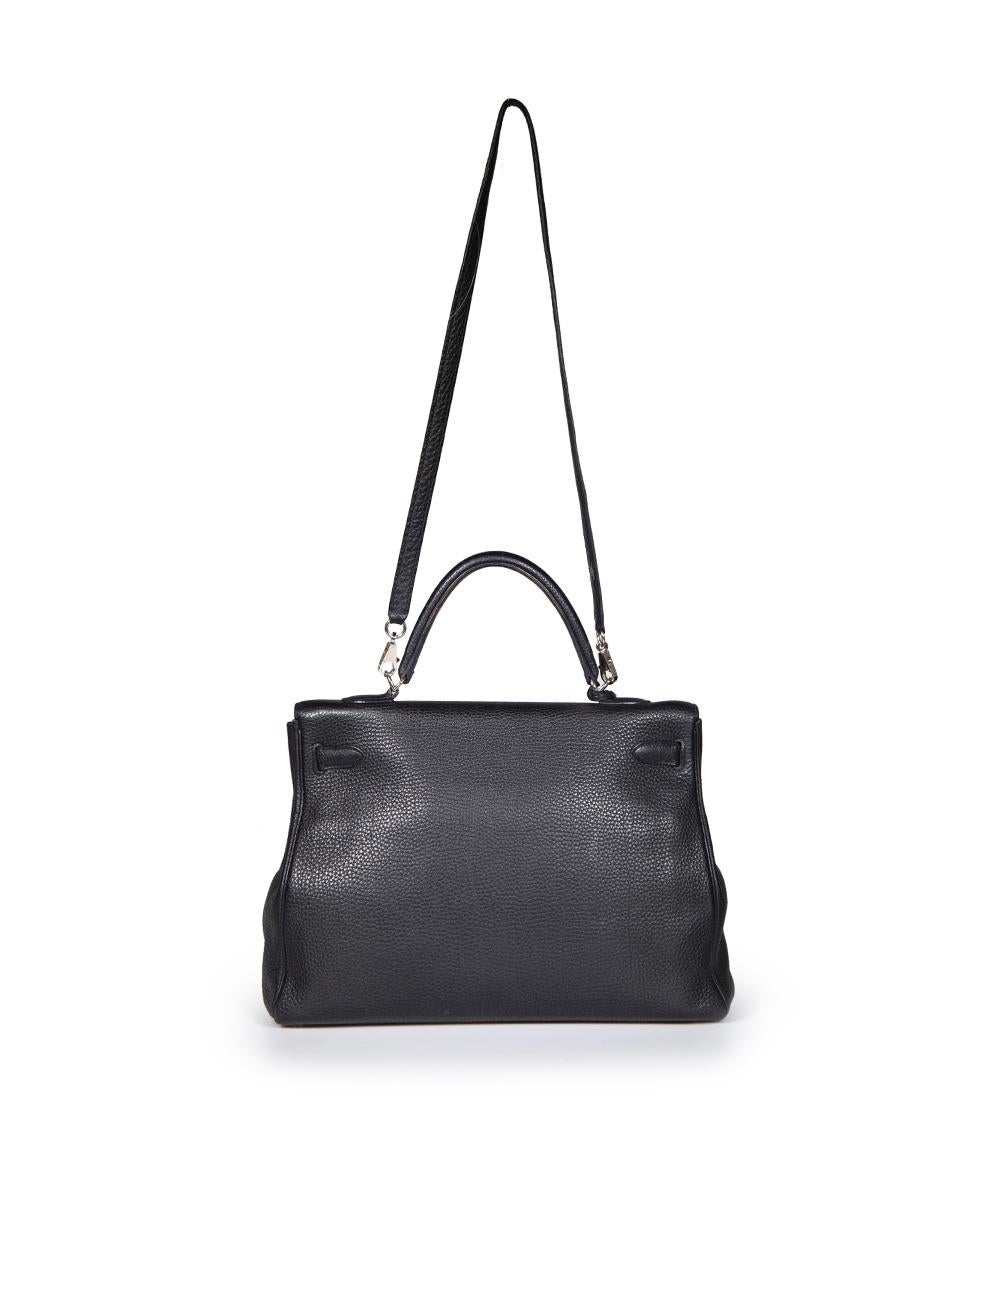 Hermès 2009 Black Leather Kelly 35 Retourne Noir Veau Togo PHW In Good Condition For Sale In London, GB